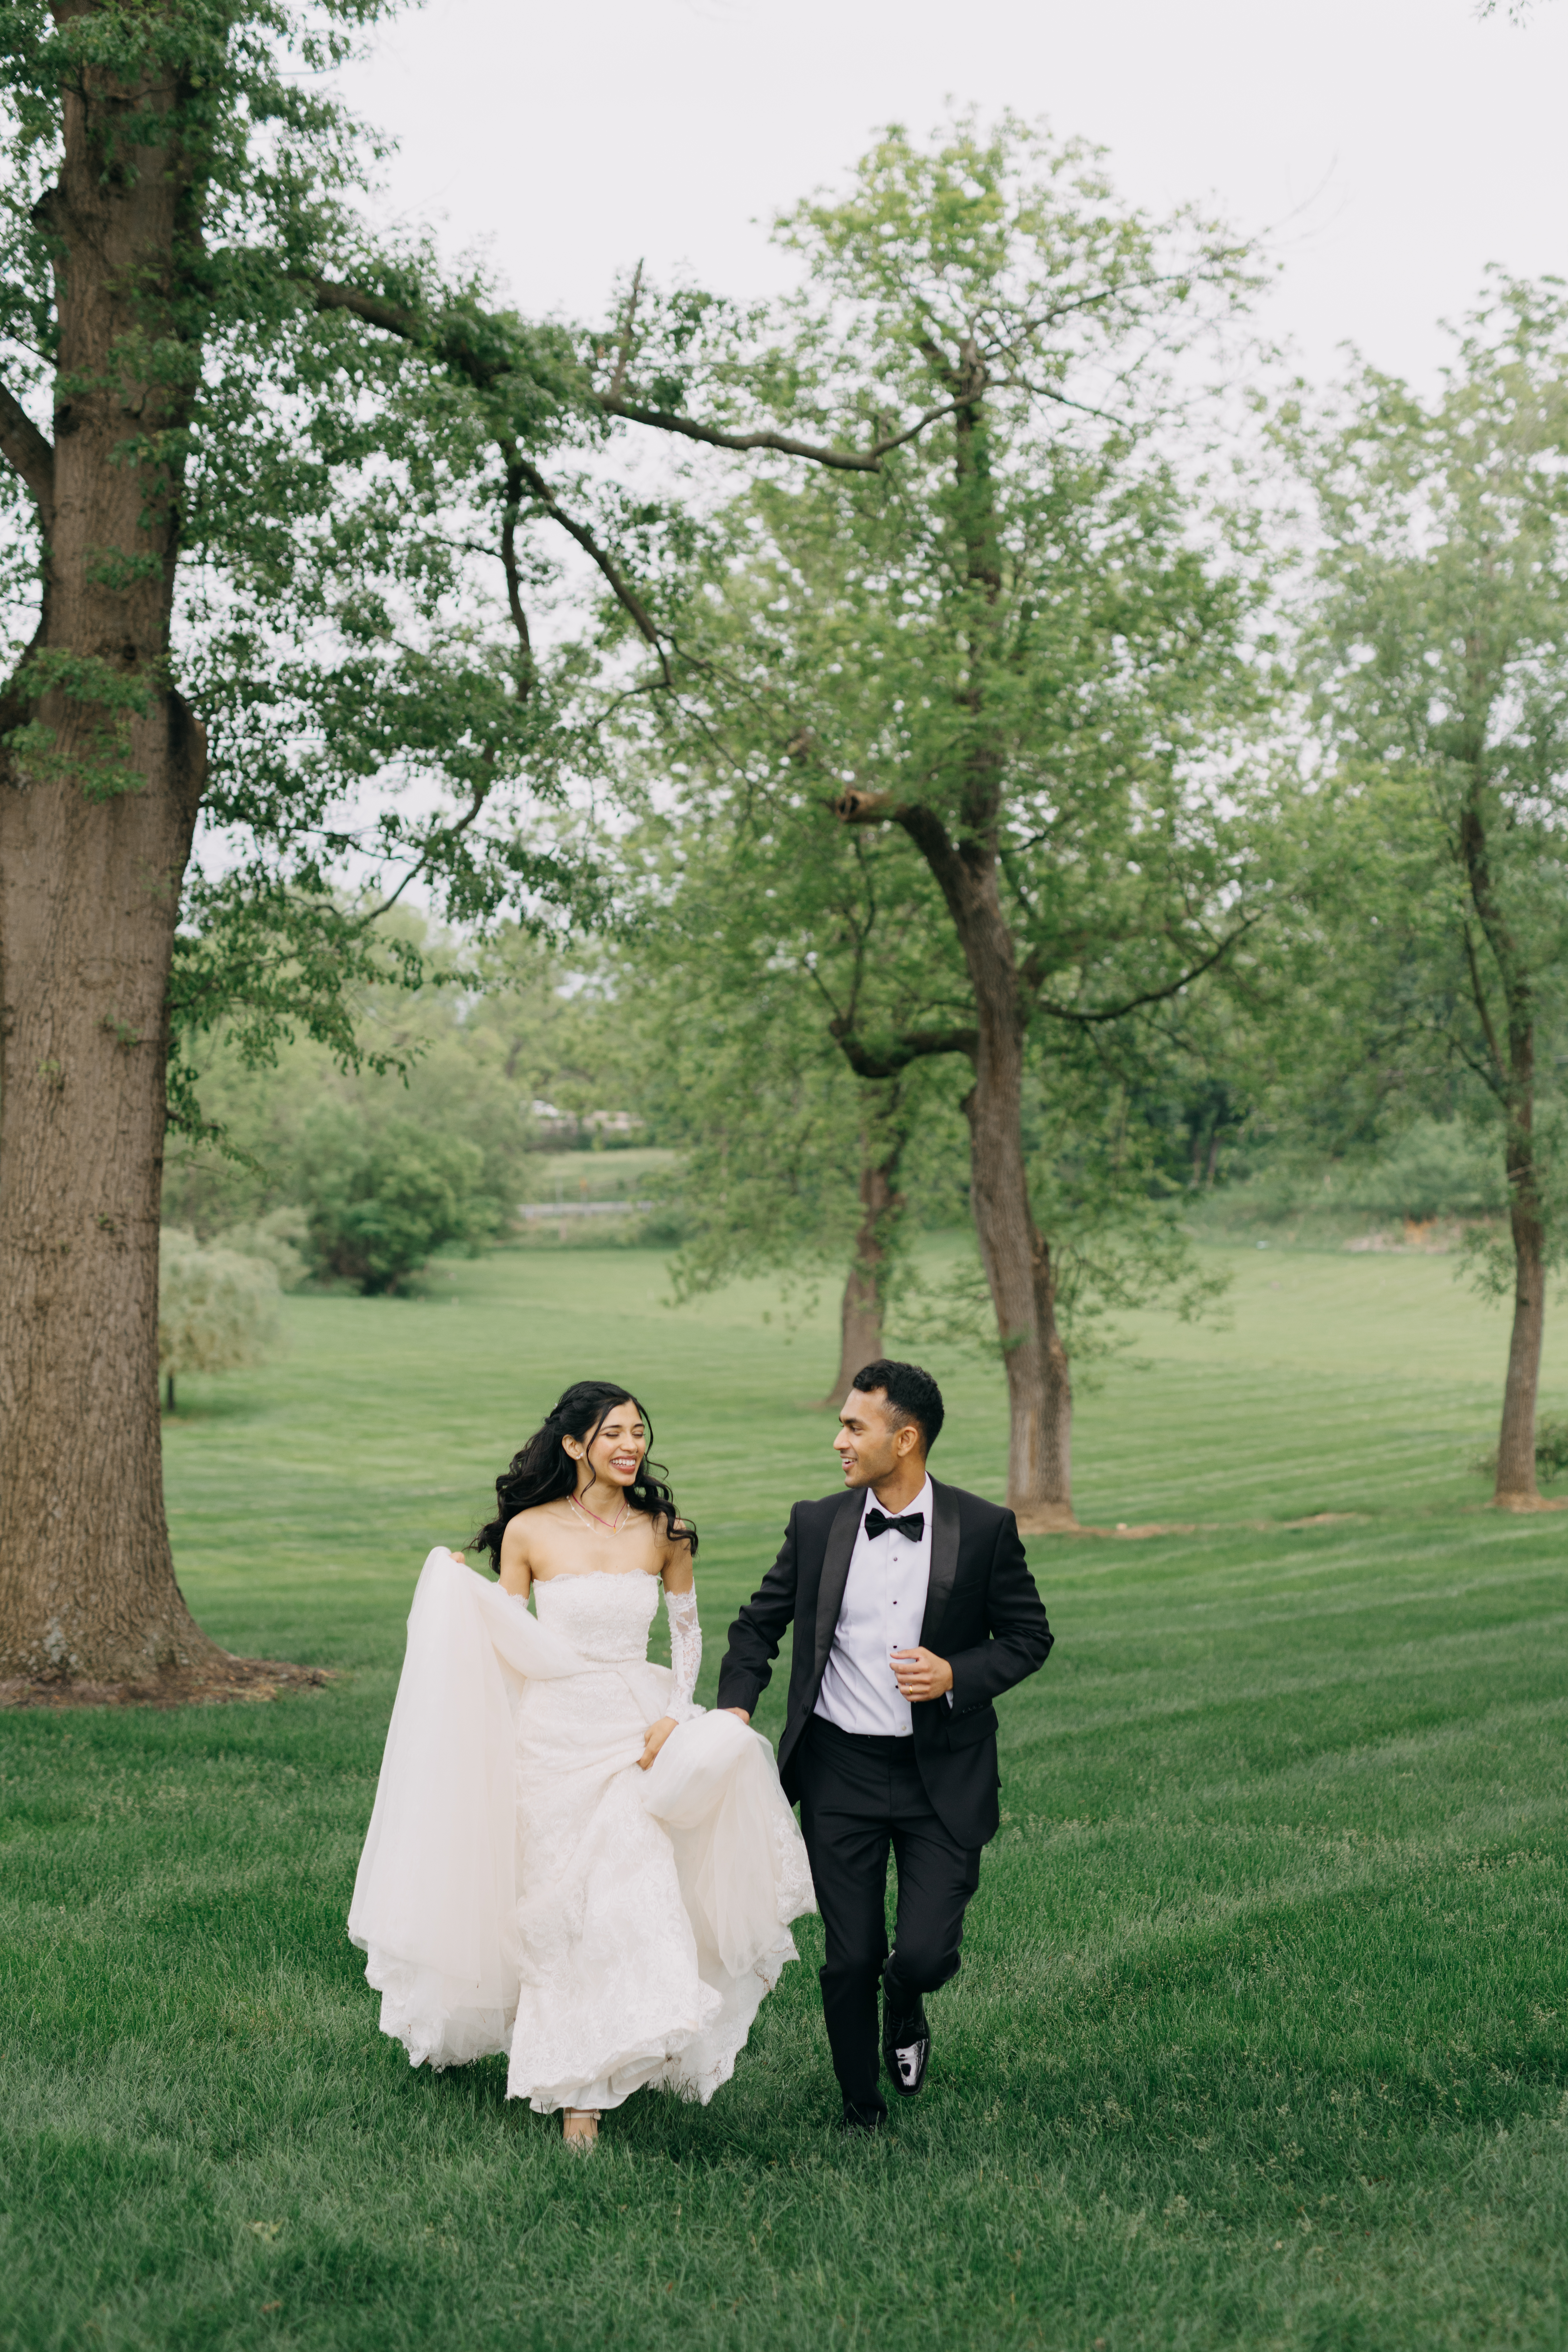 Willows at Ashcombe Wedding Venue, Willows at Ashcombe Wedding, Philadelphia Wedding, Philadelphia Wedding Photographer, New Jersey Wedding Photographer, Fern & Fountain Photography, Emily Wilkerson Photo